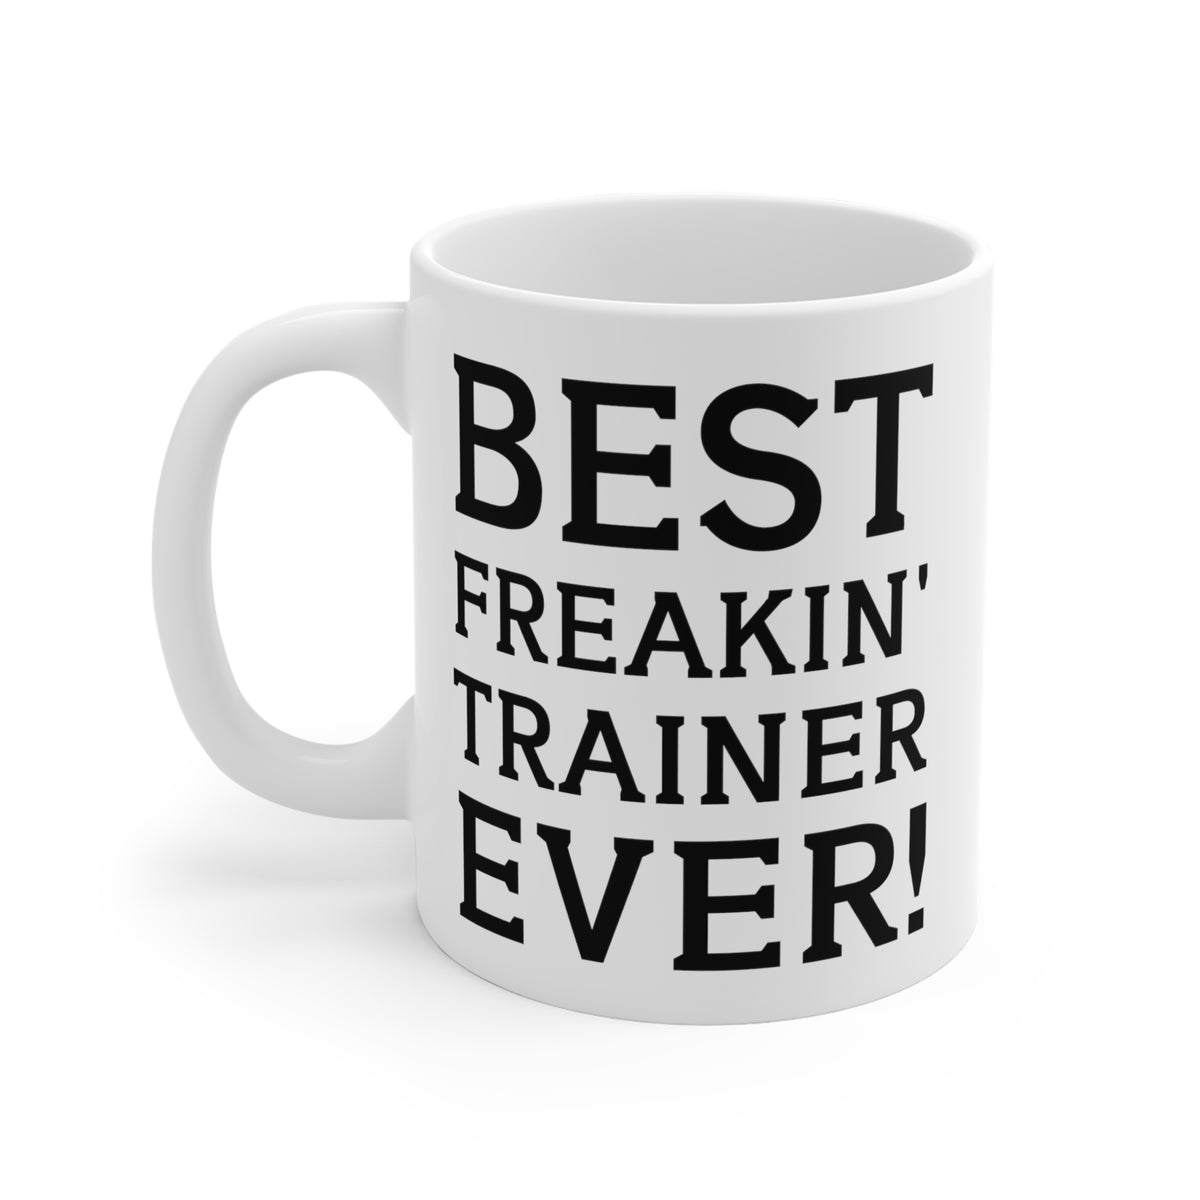 Personal Trainer Gifts - Best Freakin' Trainer Ever!Coffee Mug - Gifts For Athletic Trainer Fitness Trainer Men Women